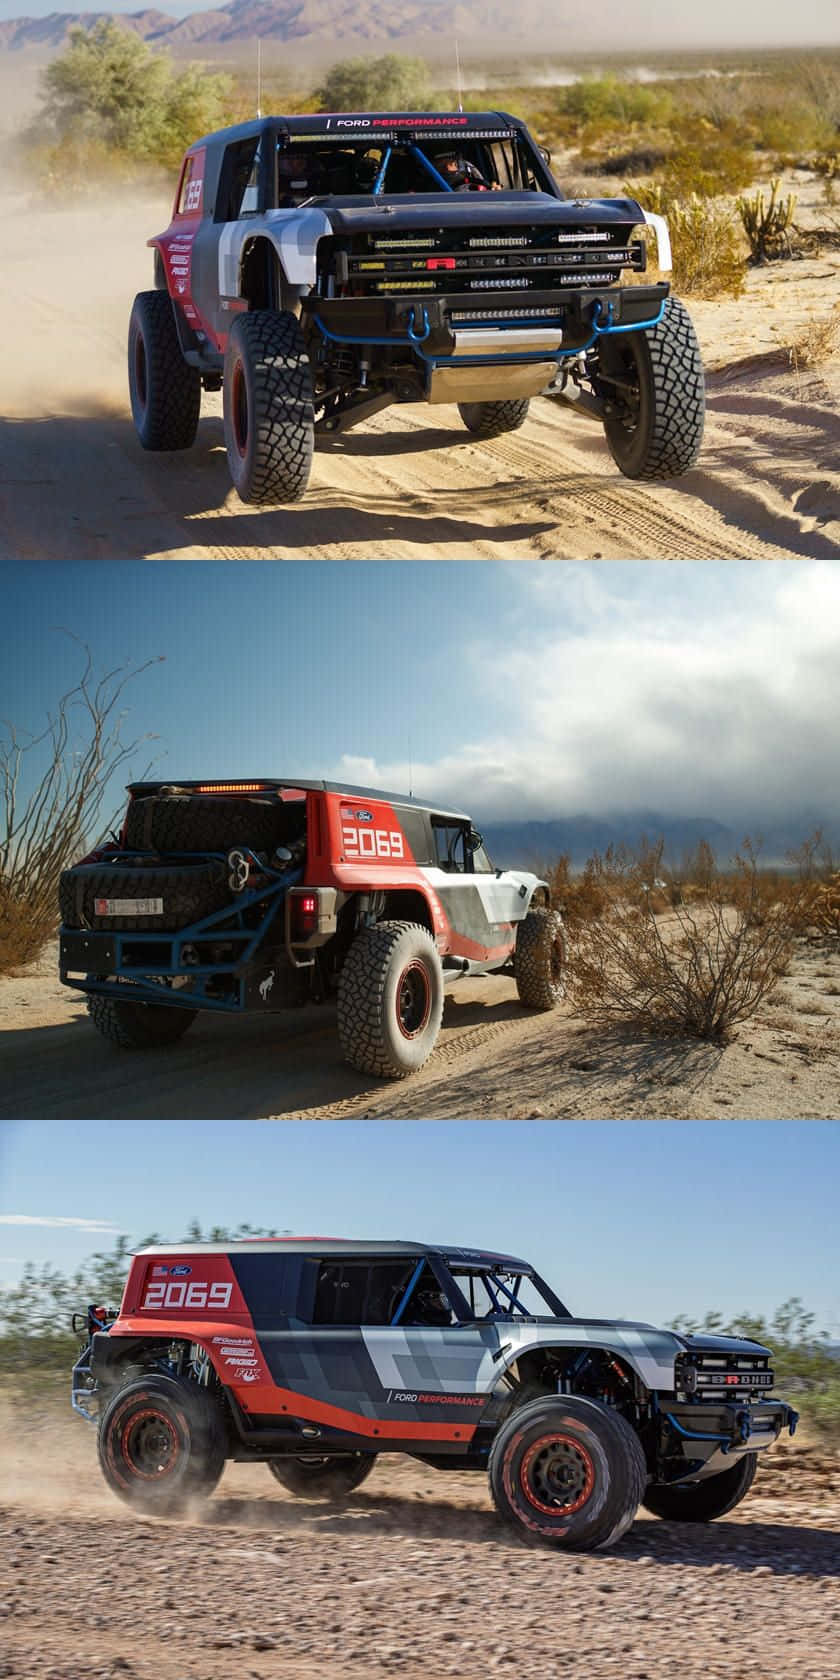 Off-Road Adventure in a Rugged 4x4 Vehicle Wallpaper